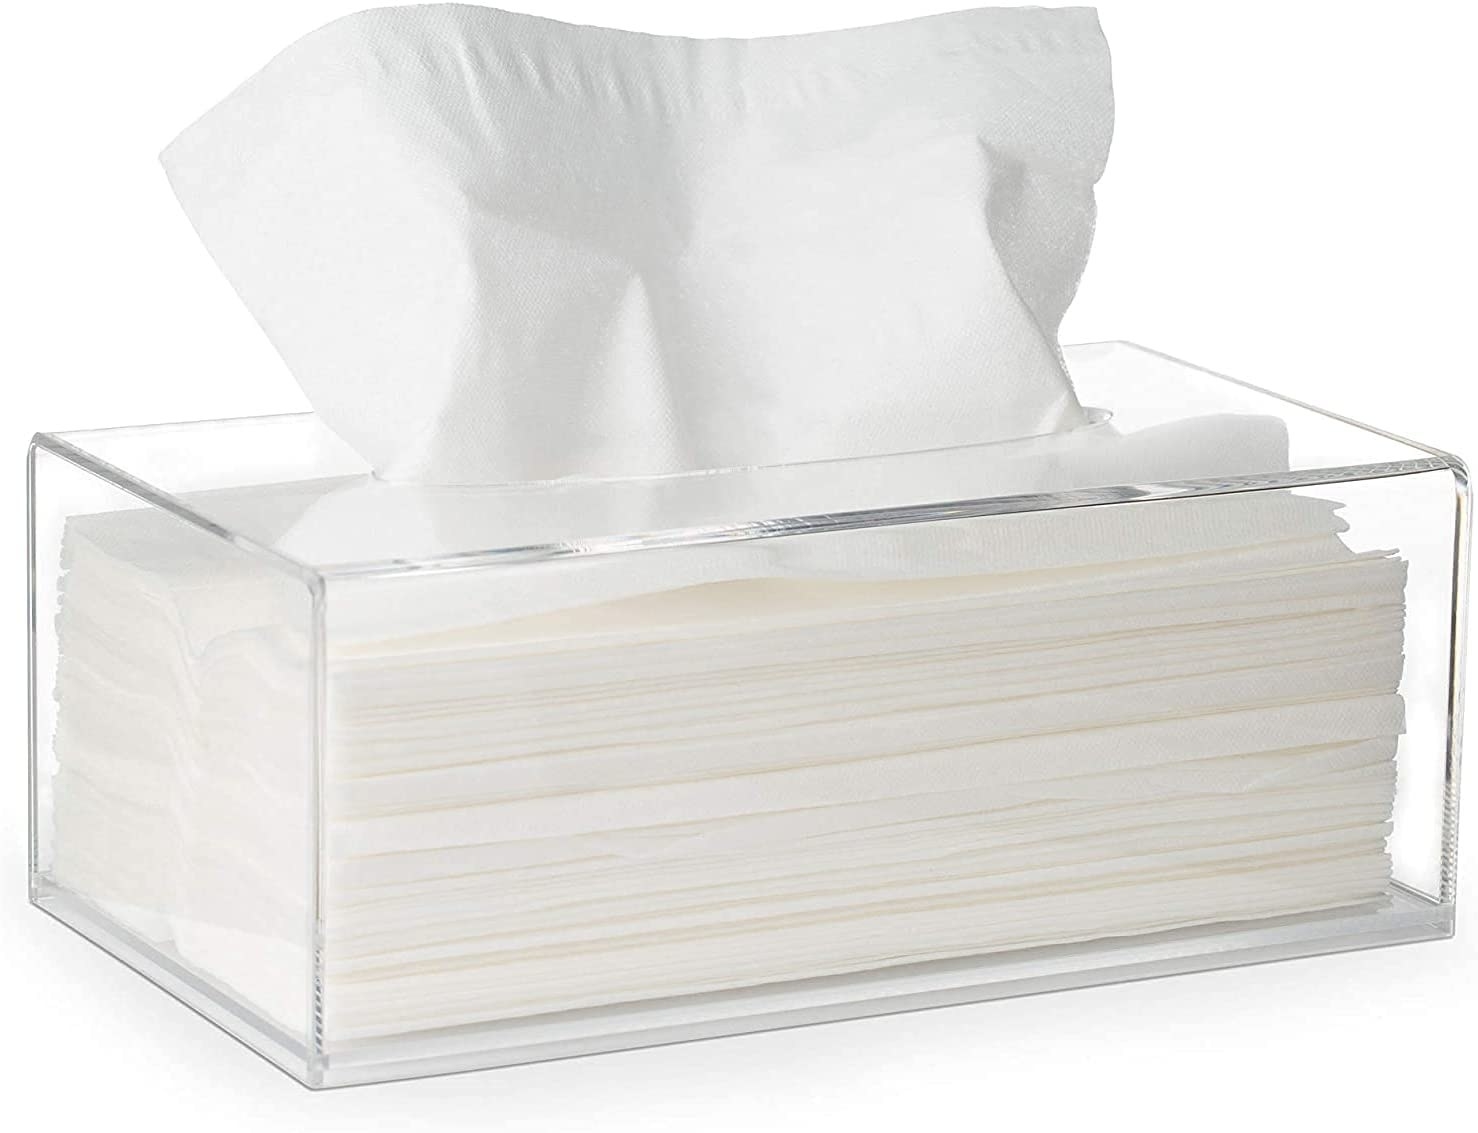 The clear tissue box is stacked with tissues inside it